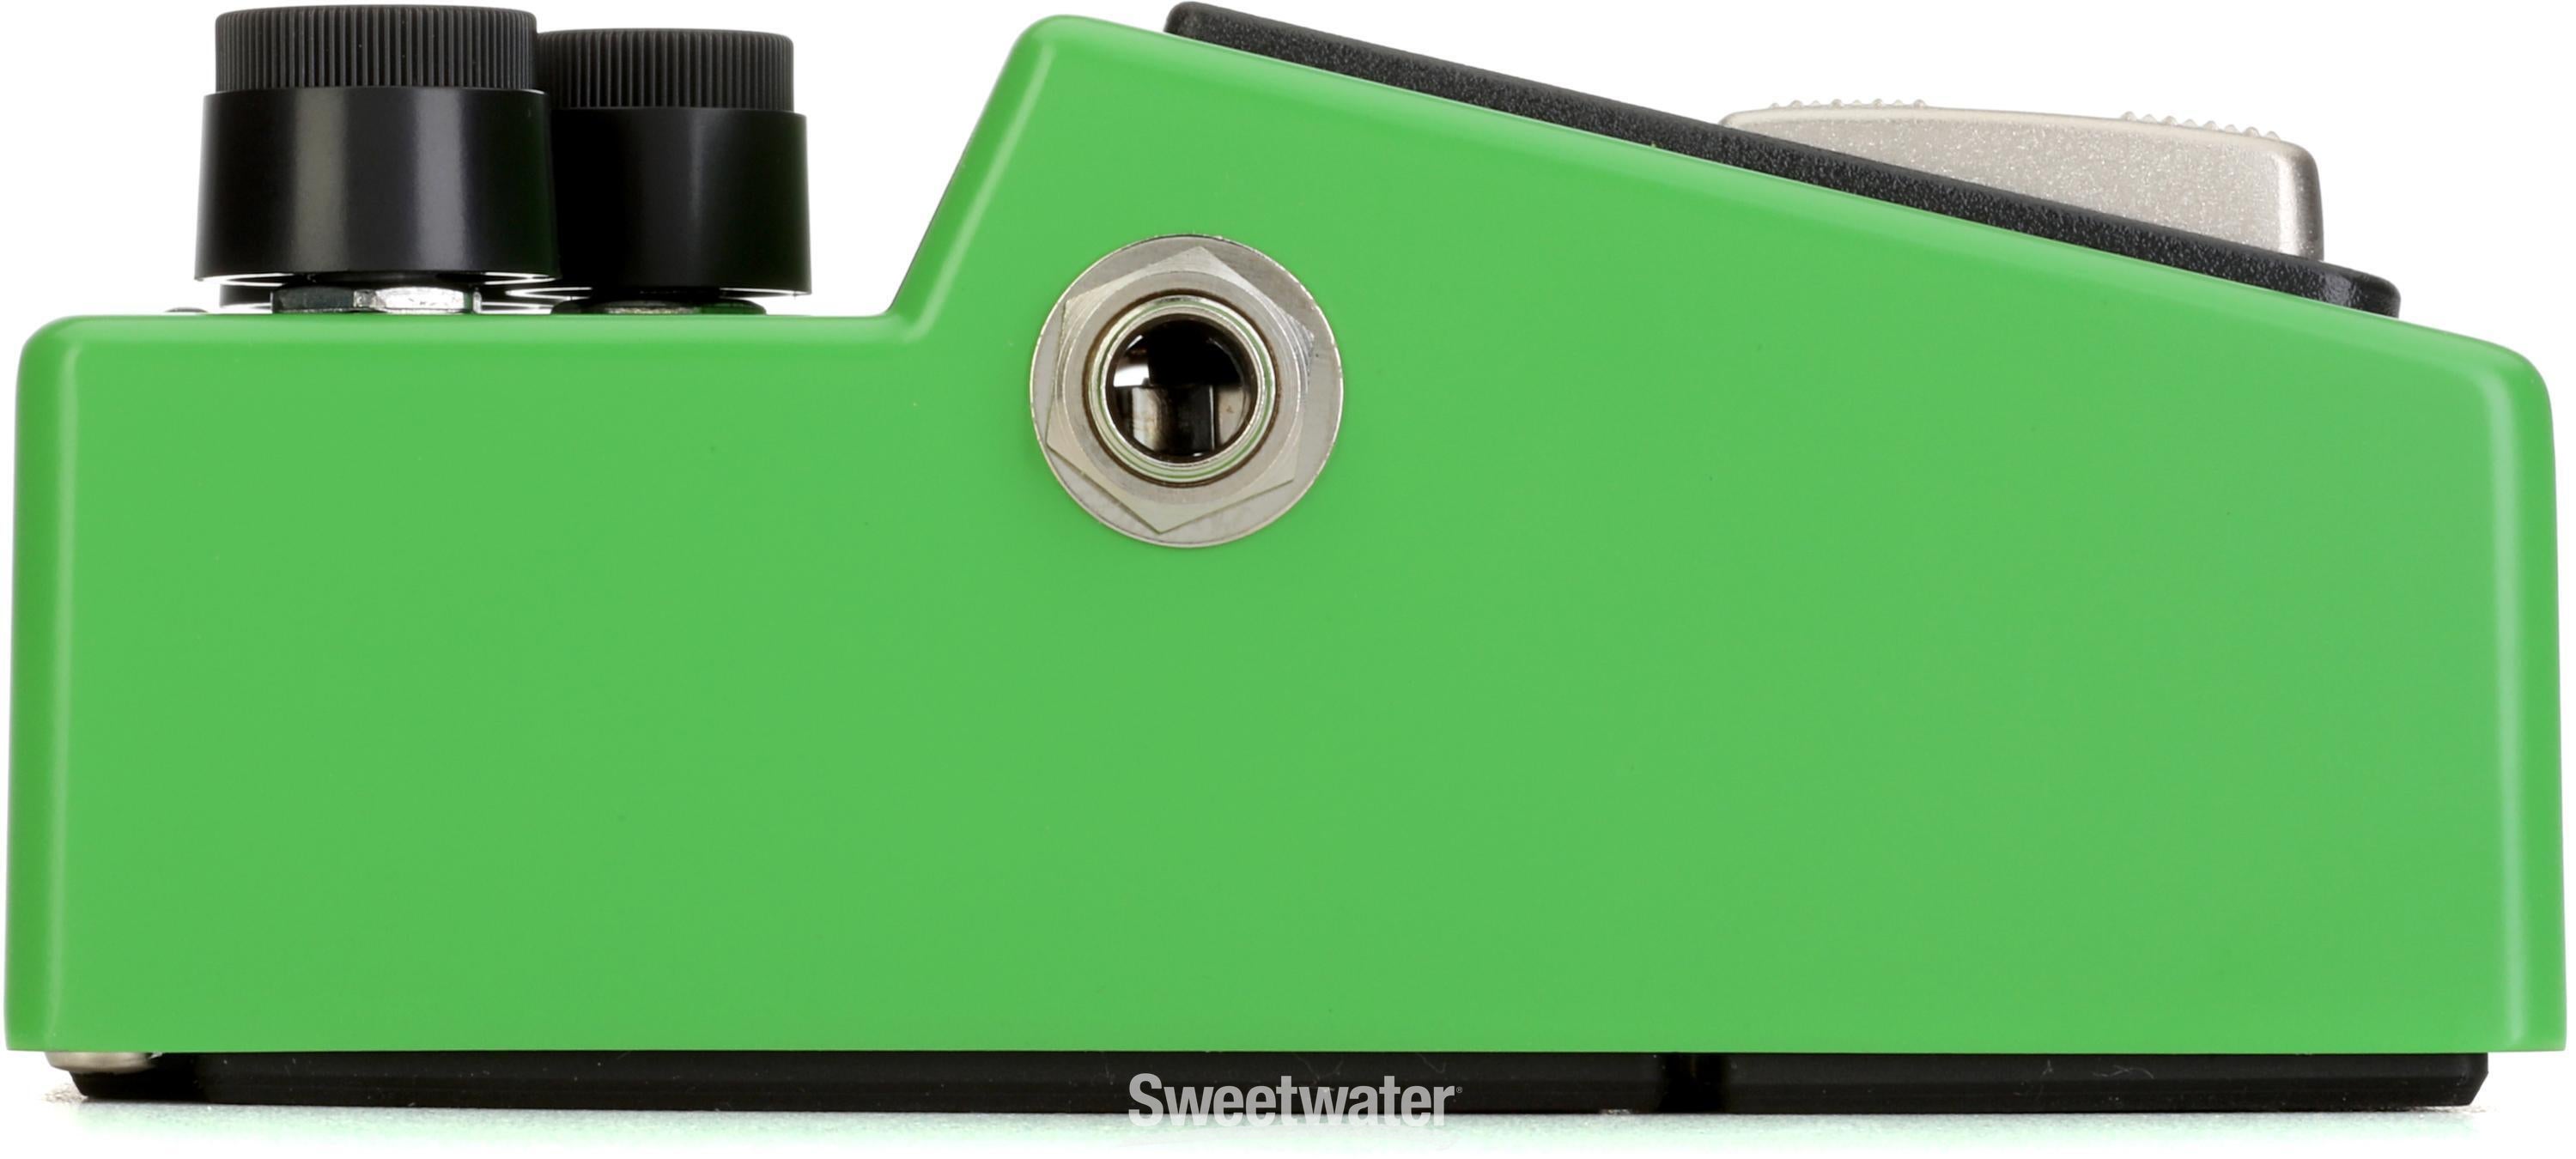 Ibanez TS9 Tube Screamer Overdrive Pedal | Sweetwater